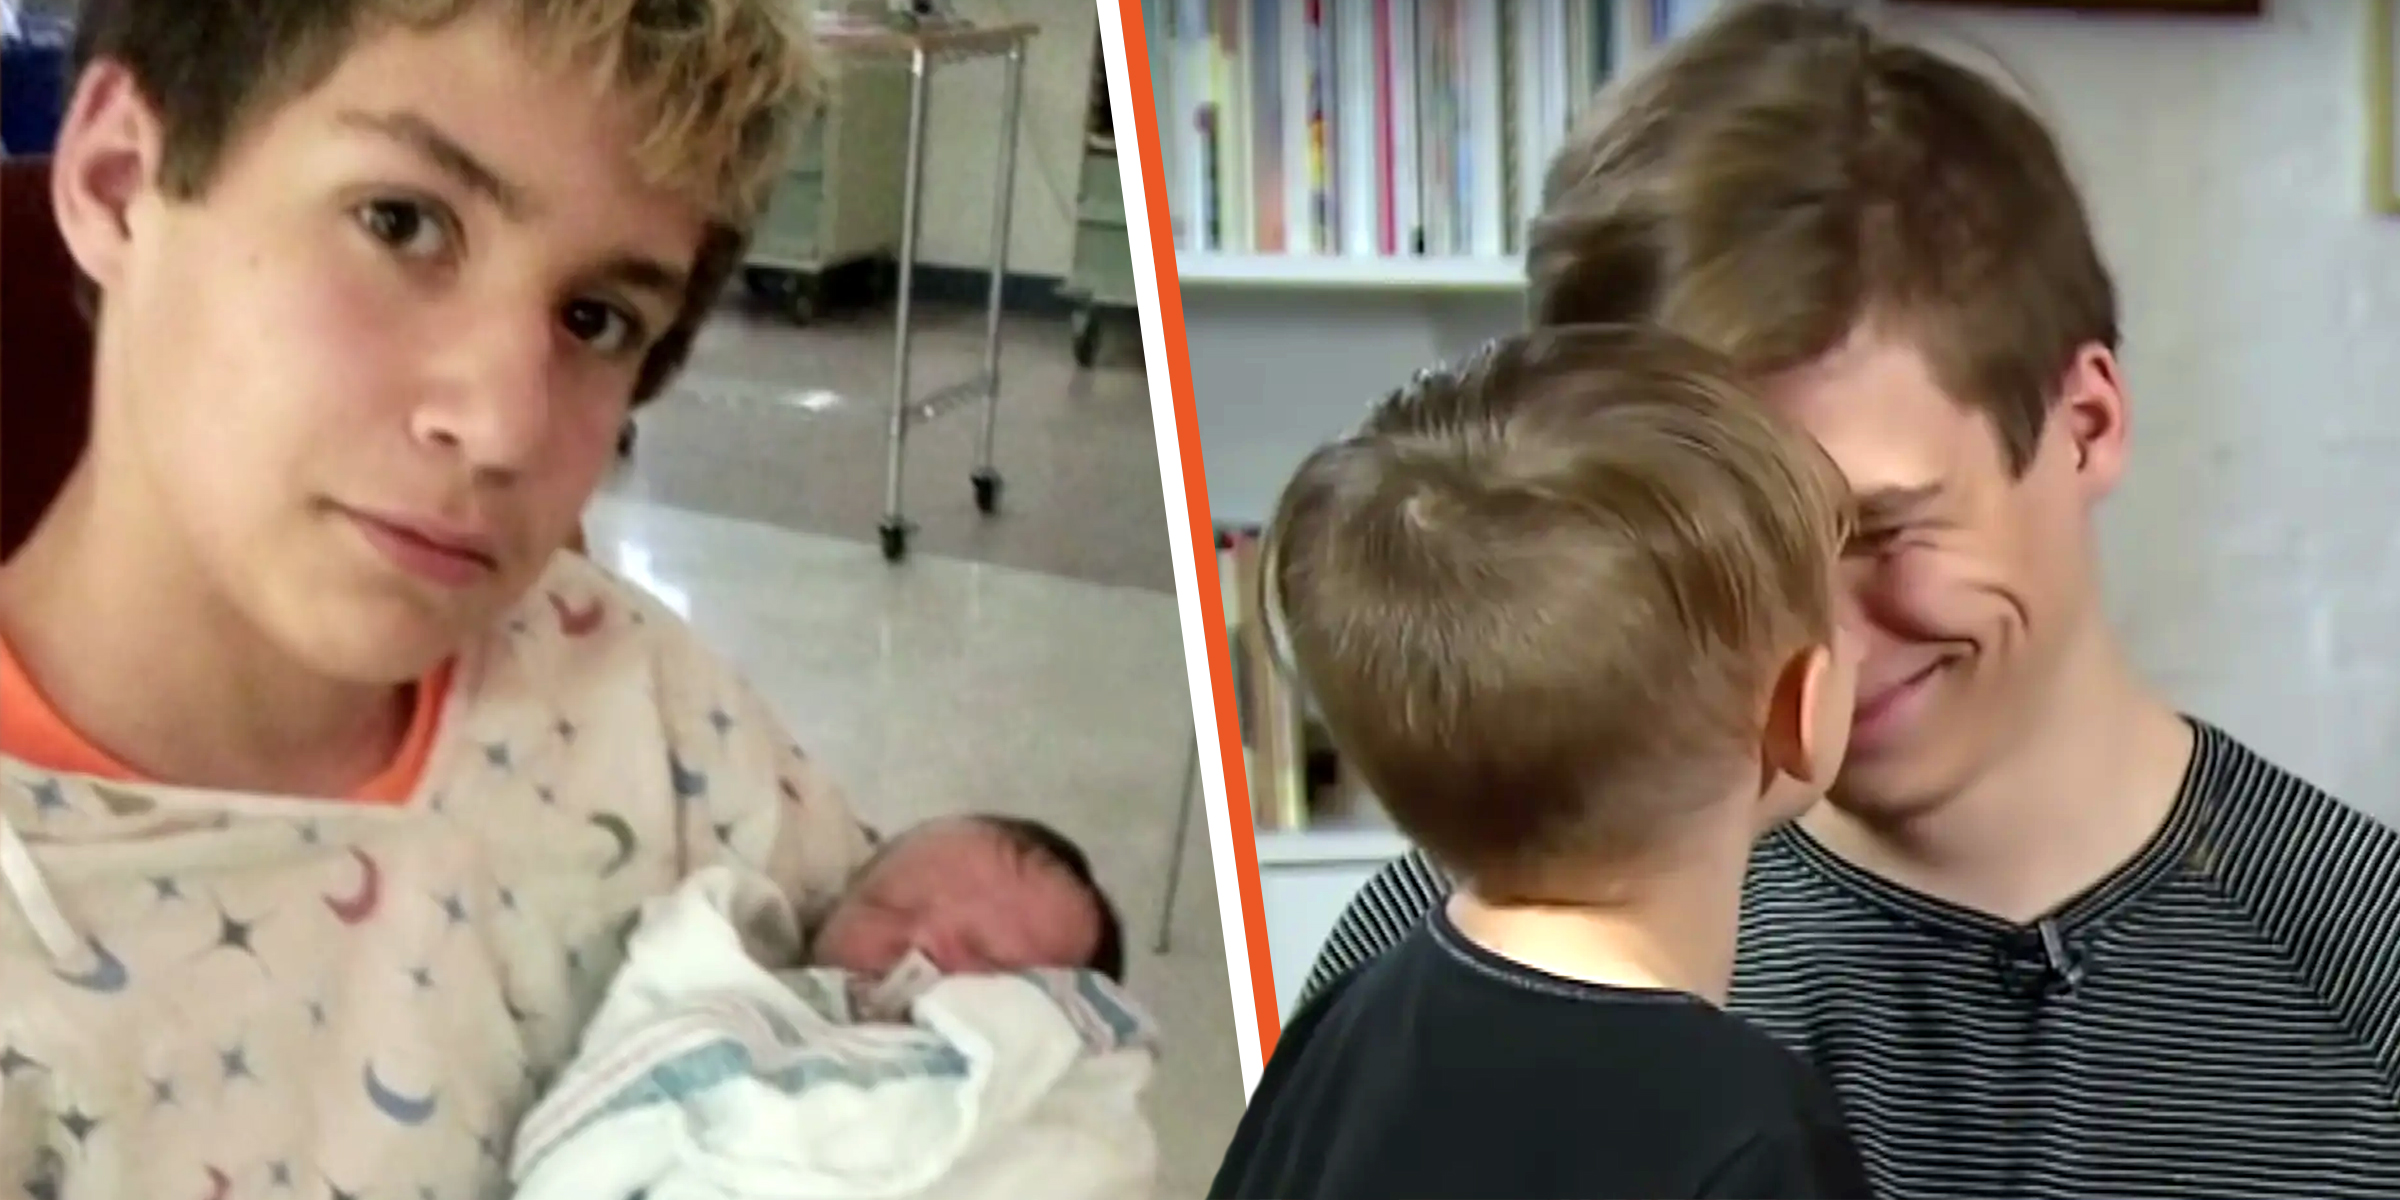 11-year-old Chris McBride with his newborn son Bentley | 17-year-old Chris McBride with Bentley | Source: youtube.com/Inside Edition